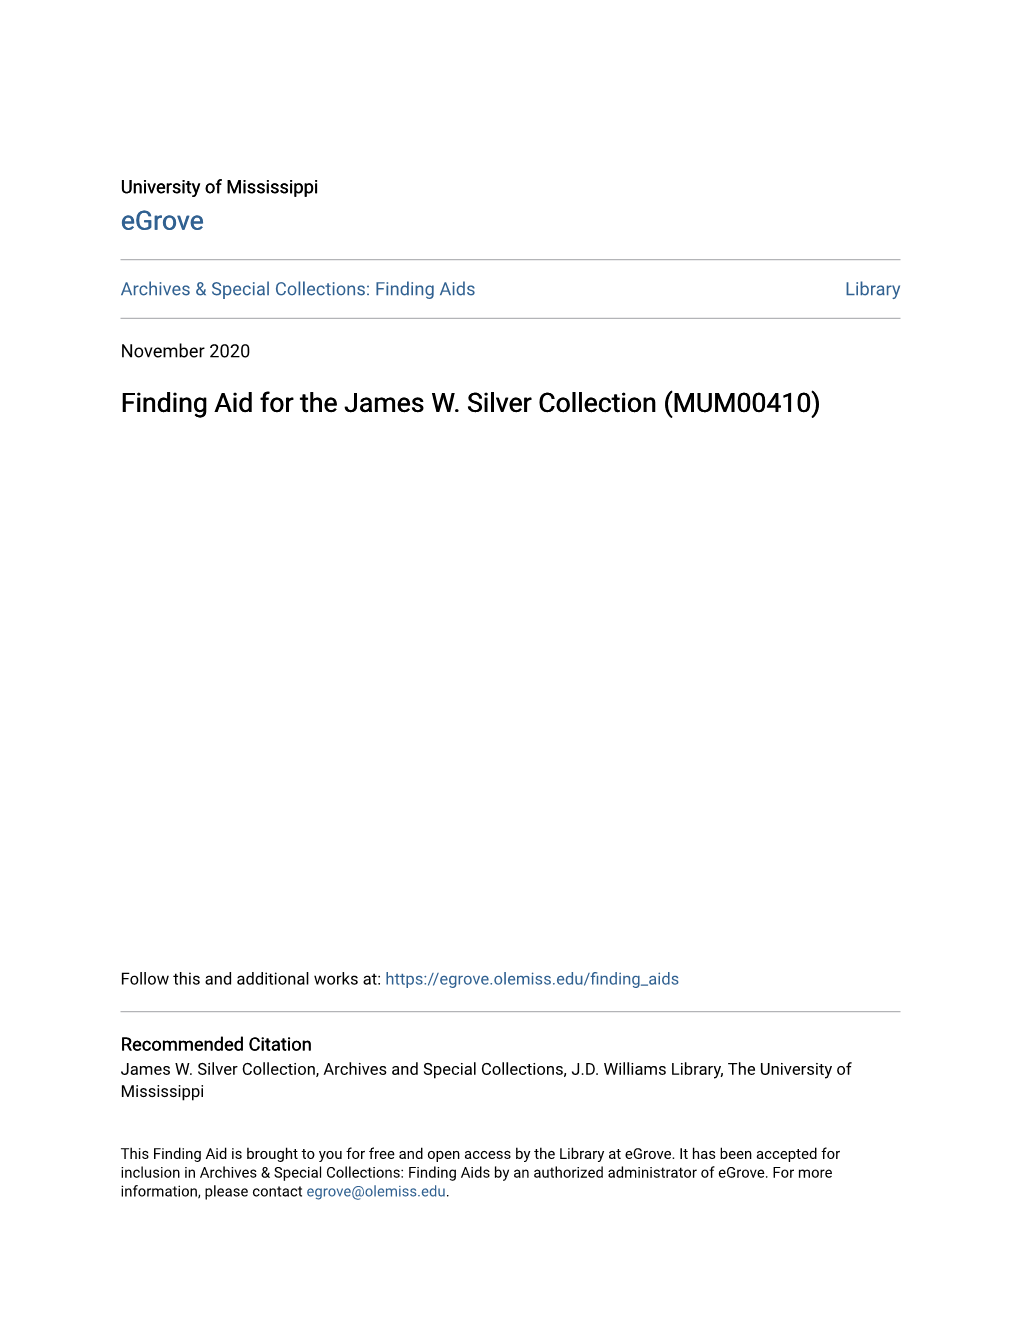 Finding Aid for the James W. Silver Collection (MUM00410)